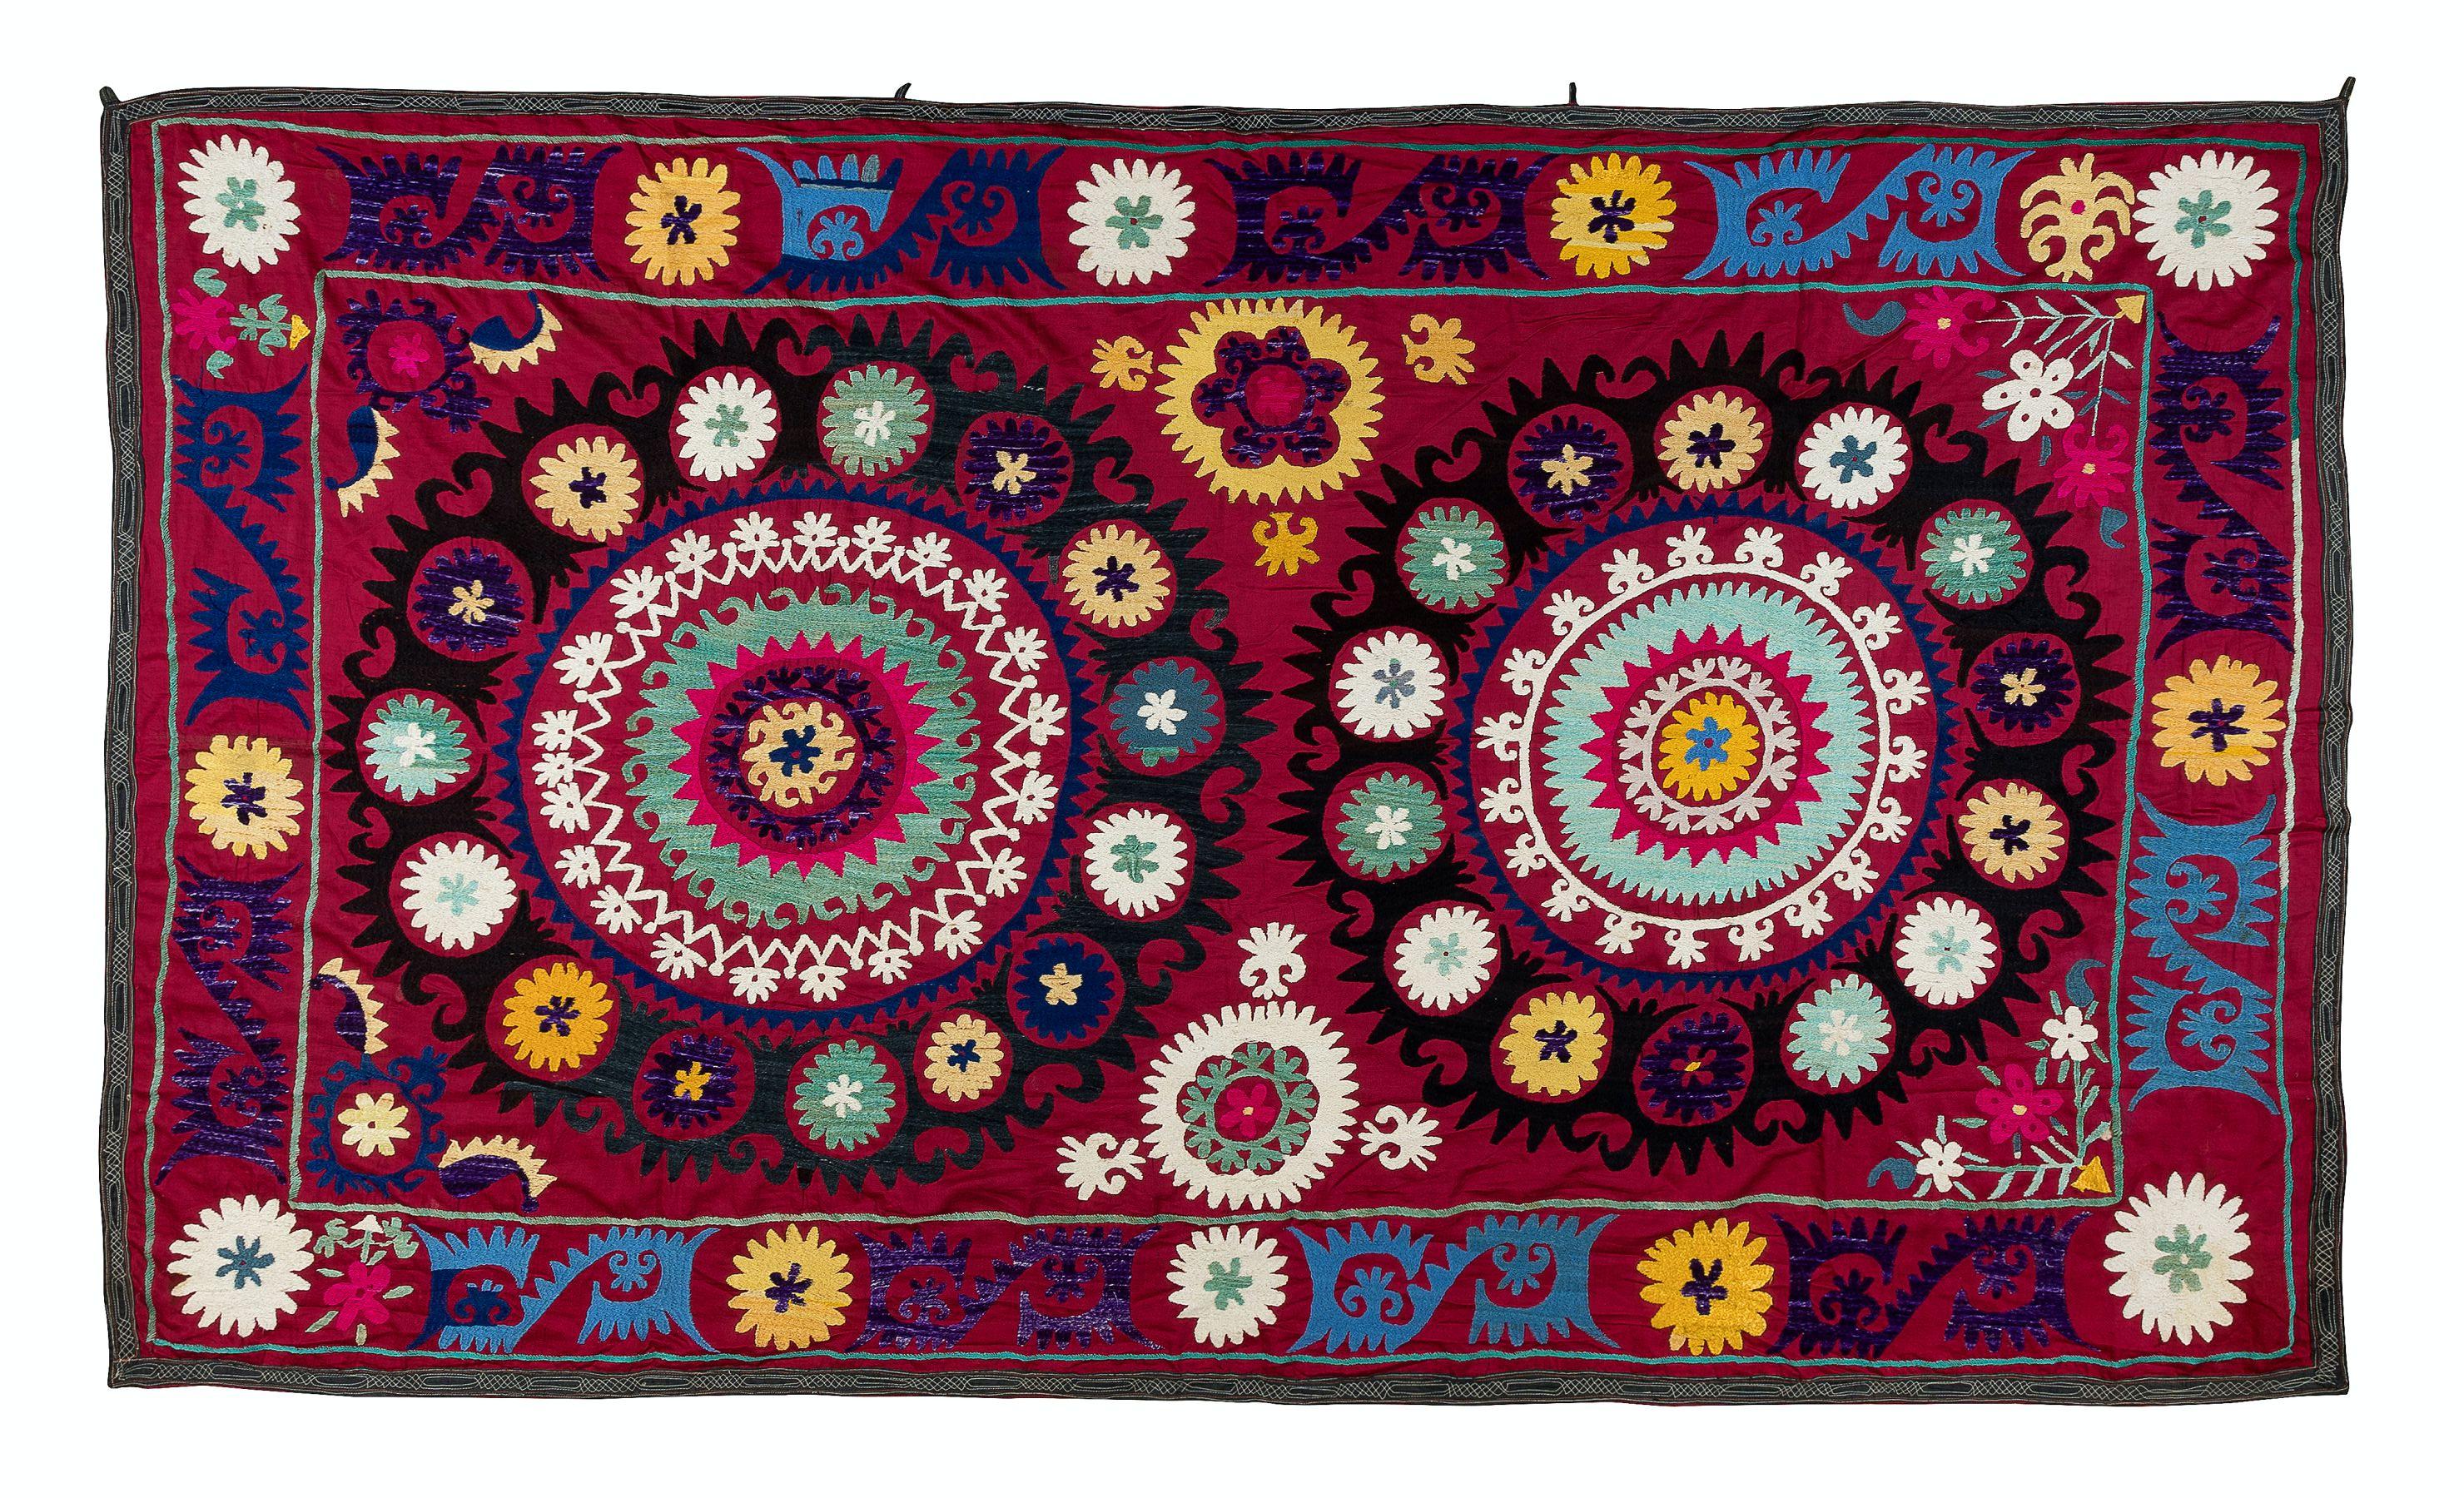 20th Century 1970s Uzbek Silk Embroidery Wall Hanging, Red Suzani Fabric Bedspread For Sale